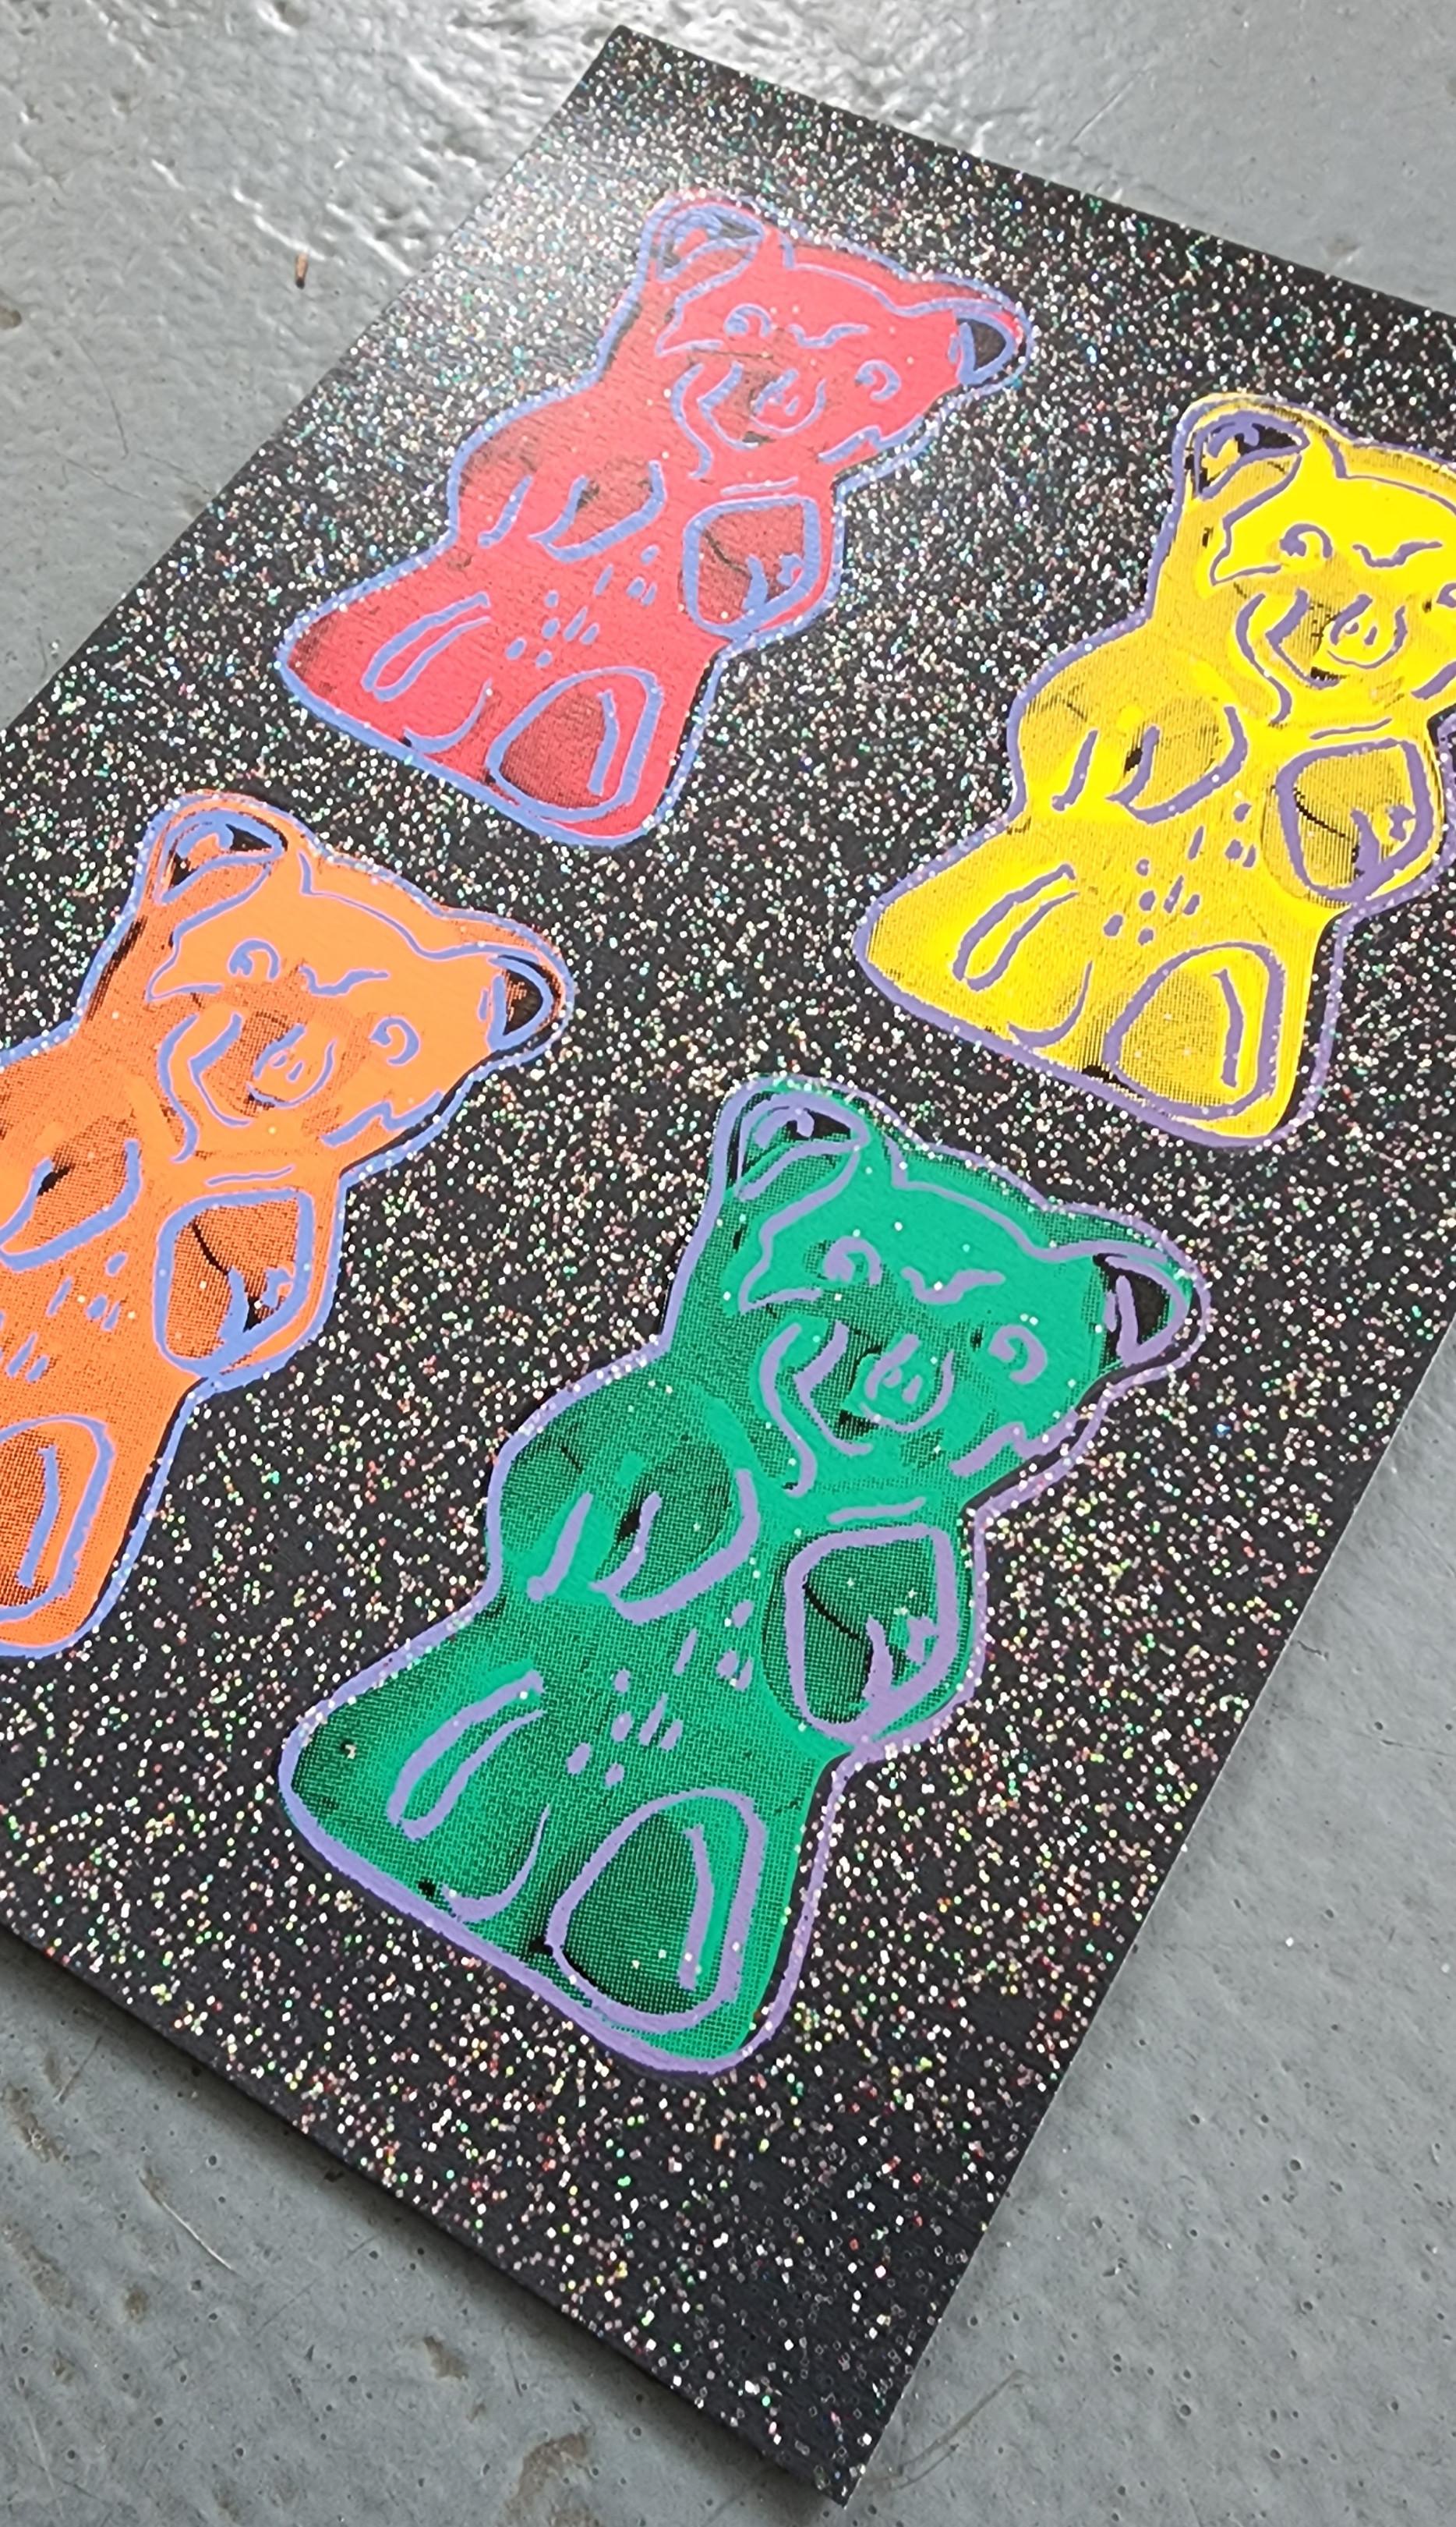 Jurgen Kuhl
Gummi Bears (Black, Gummibärchen)
Color Silk Screen Print with Glitter
Year: 2000s
Size: 7.4×5.3in
COA provided
Ref.: 924802-1182

*FRAMING OPTIONS AVAILABLE. PLEASE INQUIRE WITHIN


About Jurgen Kuhl:

In Cologne, the city of art in